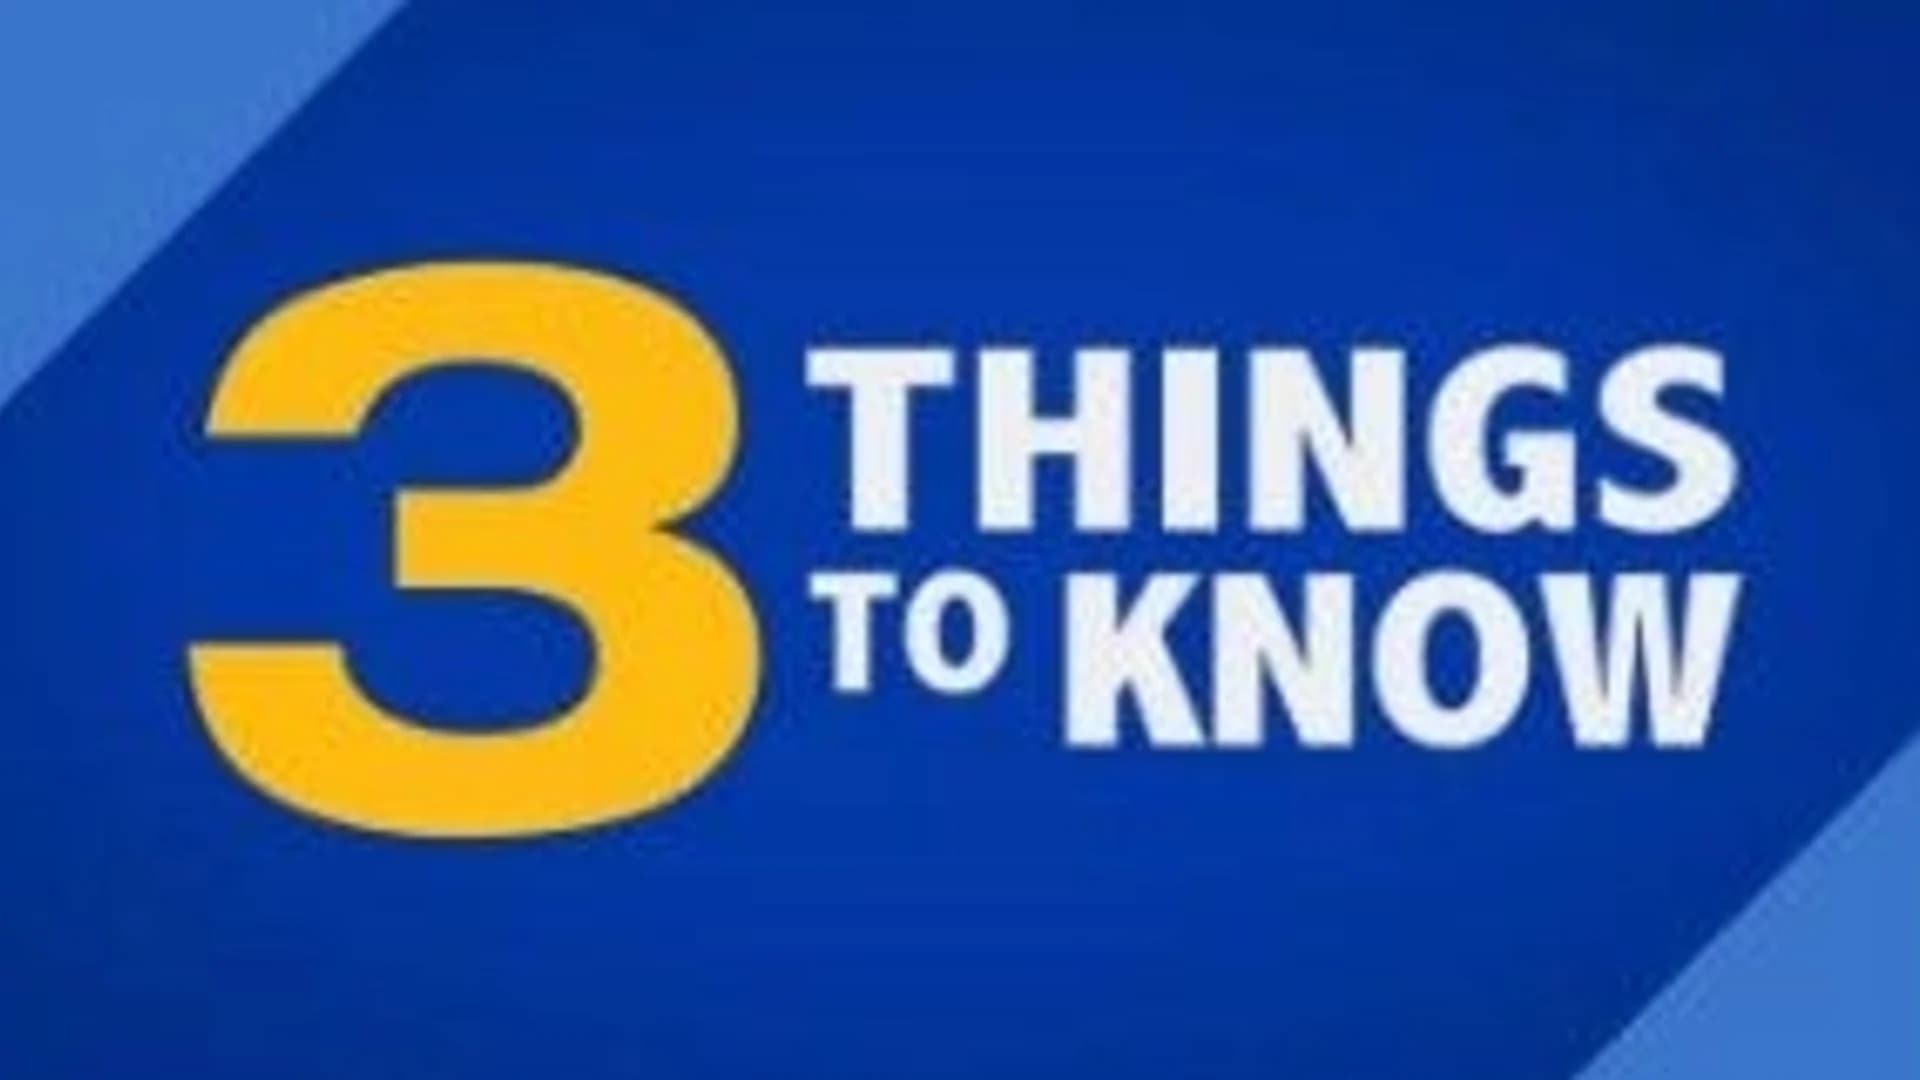 3 Things to Know – July 25, 2018